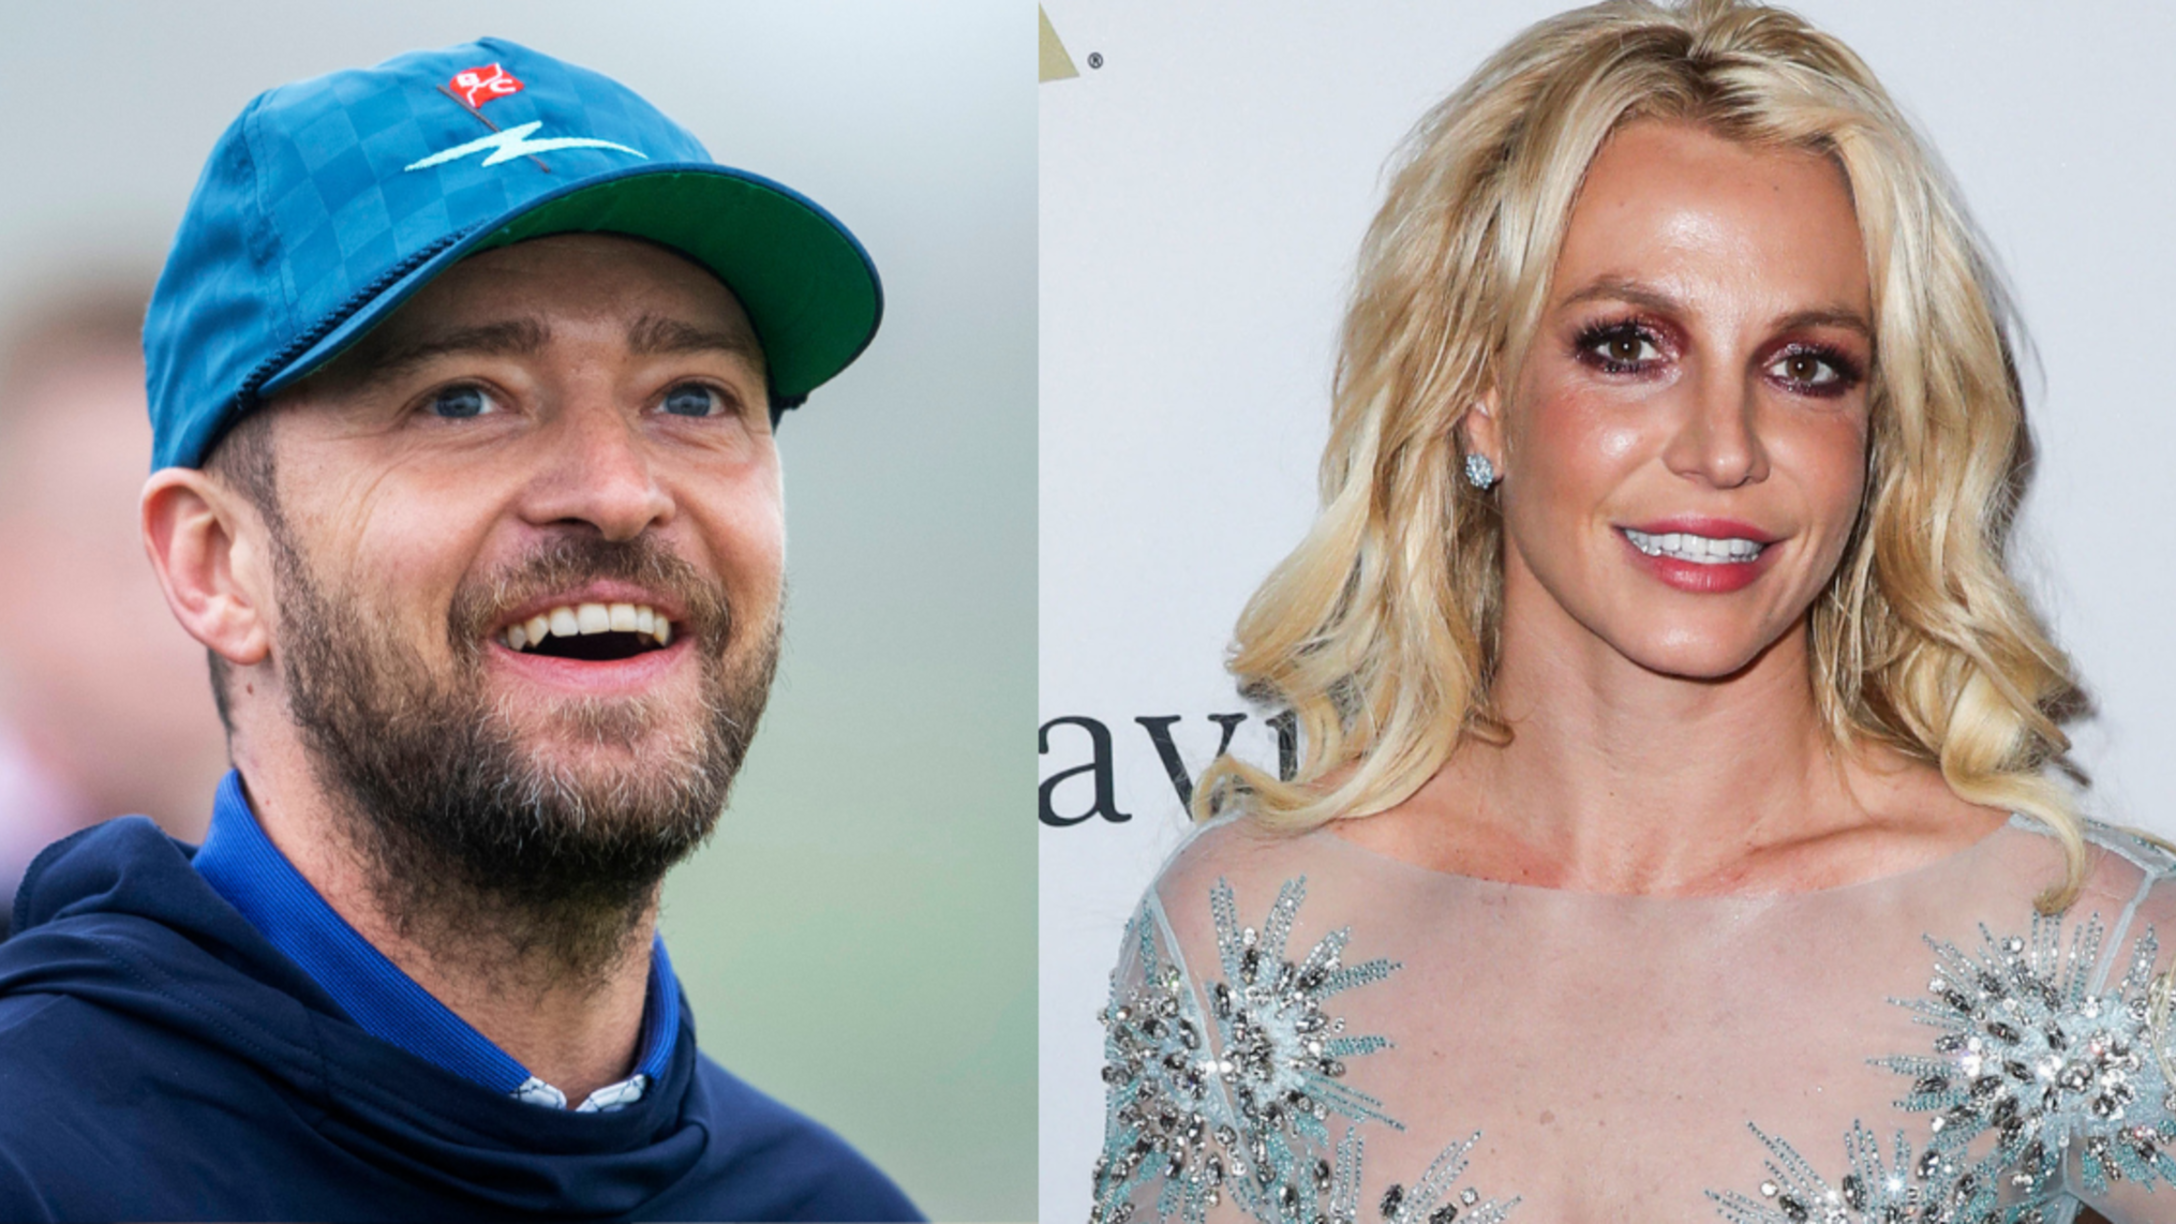 Justin Timberlake's reaction to Britney's pregnancy left people angry